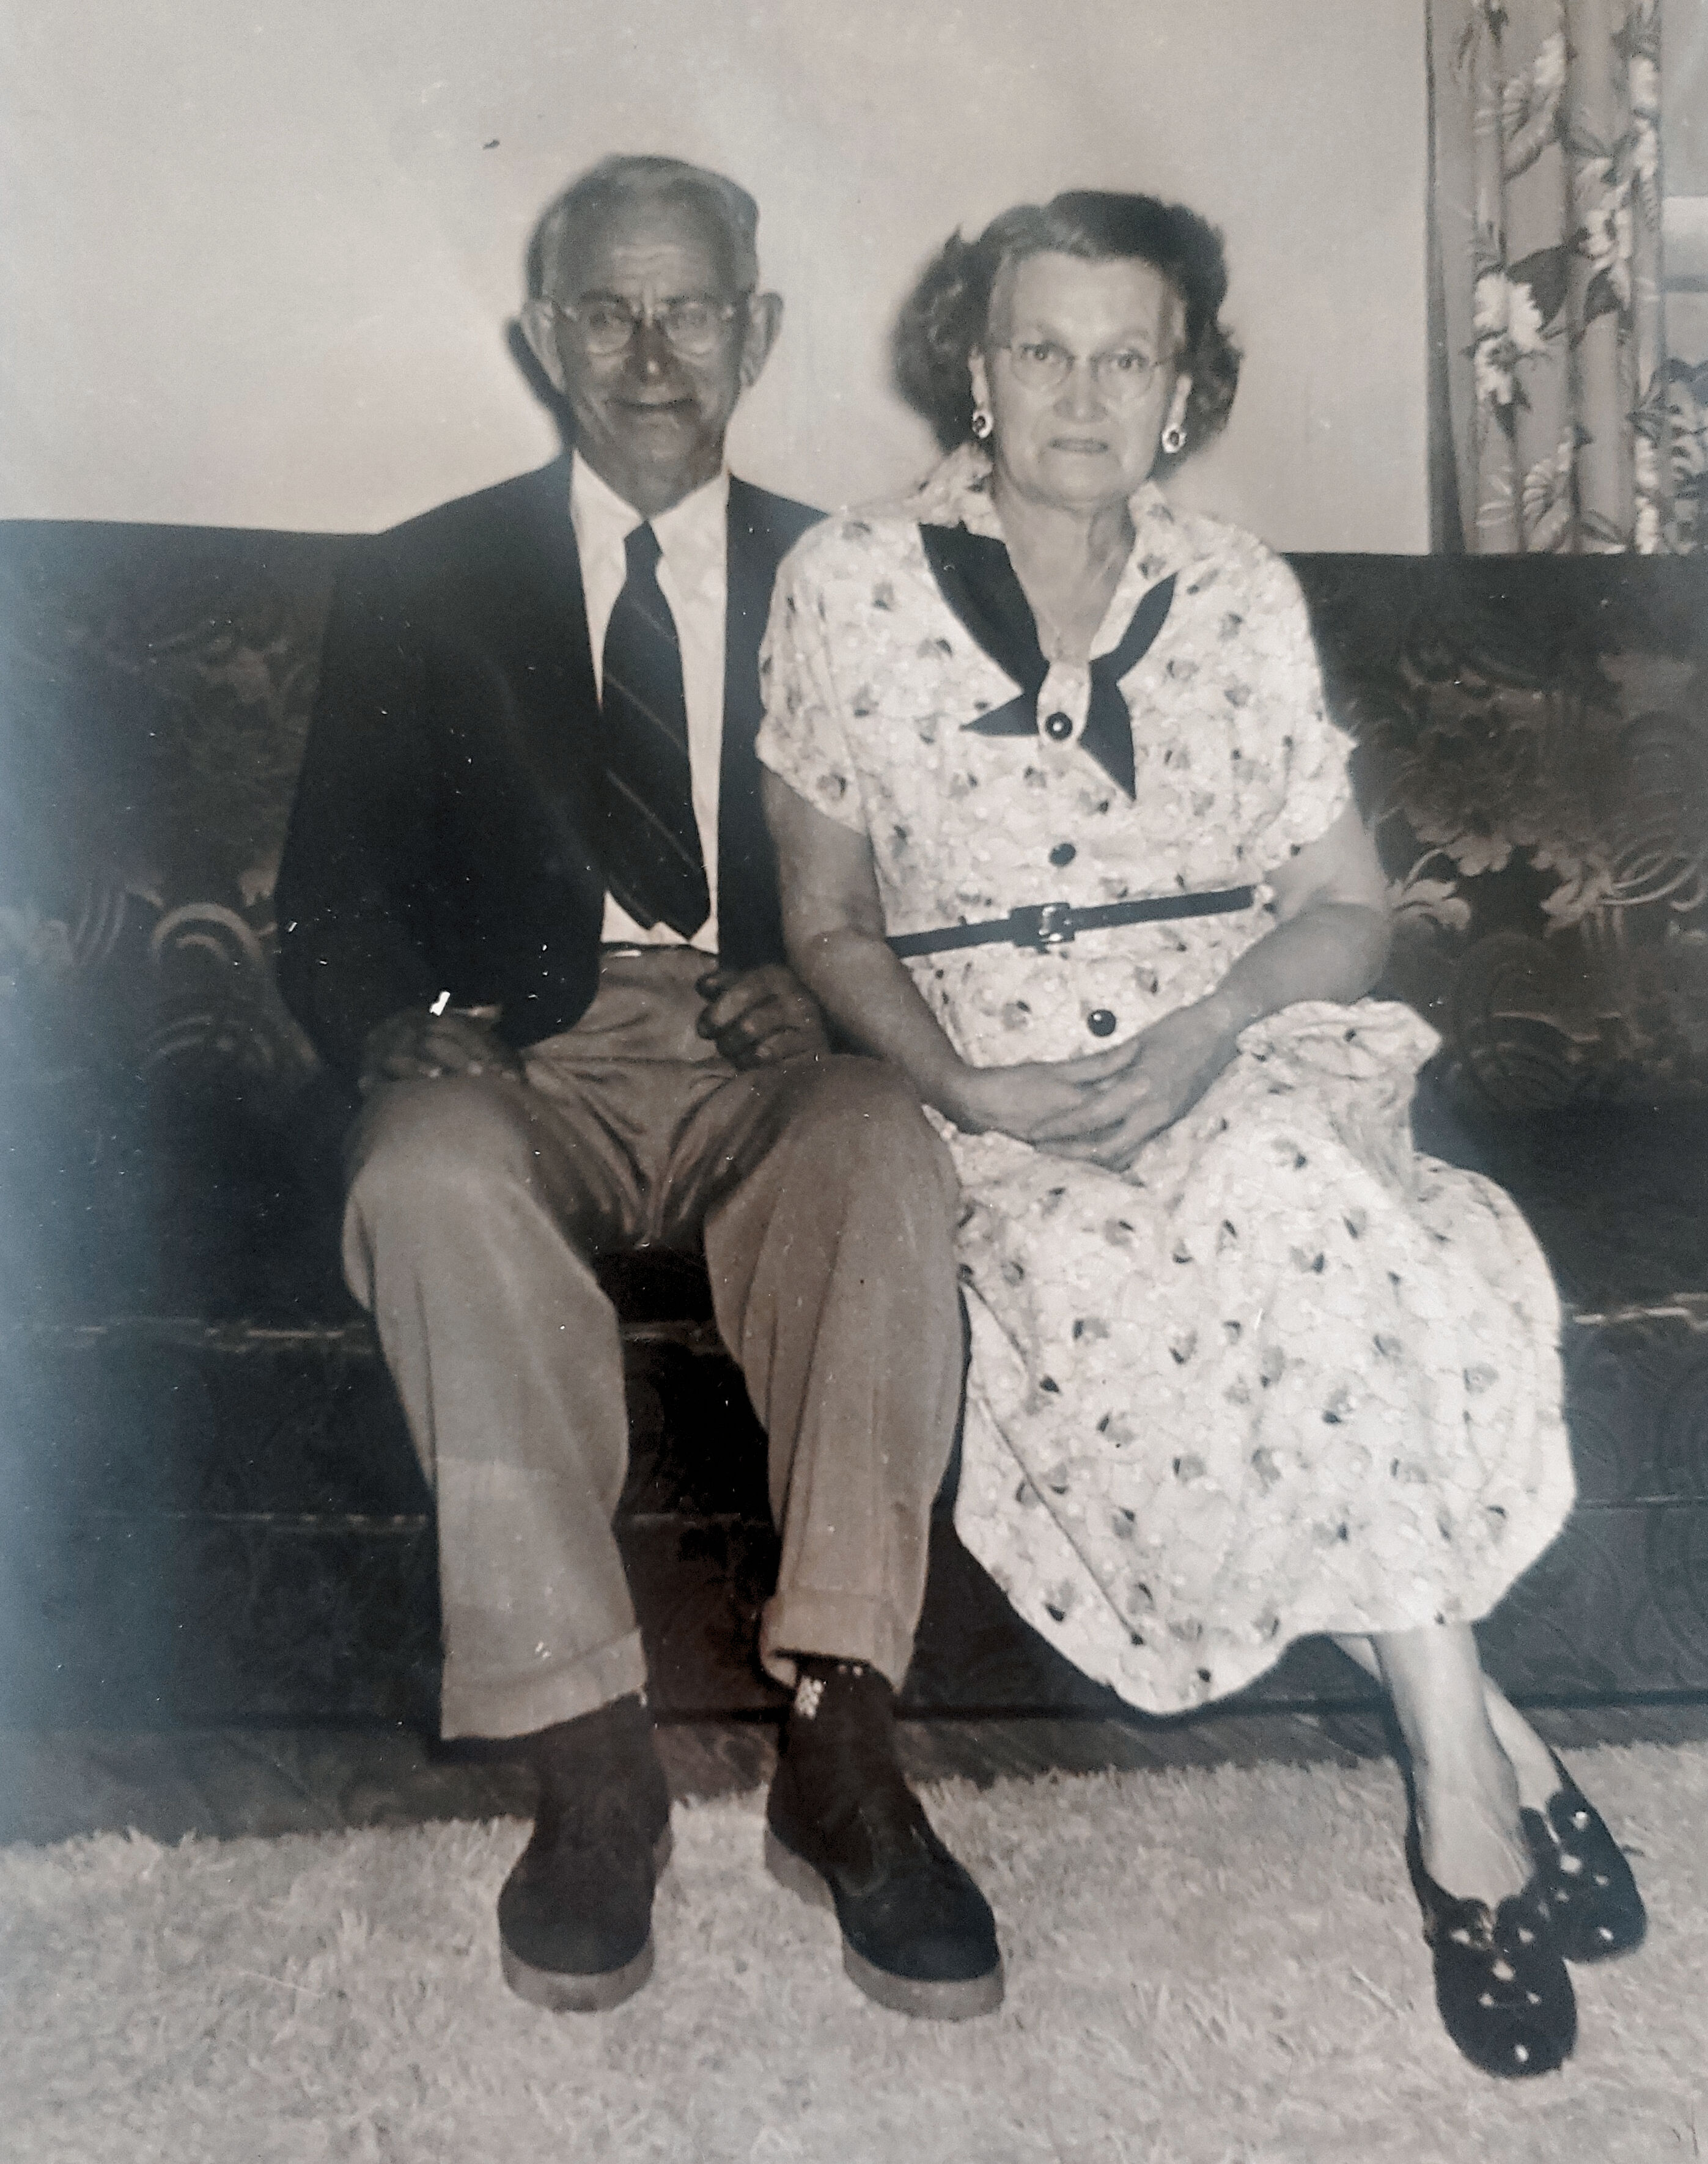 Augustin (Gus) Chiasson 1881-1965 & Marie Sarah Gionet 1892-1955. pic: 1953
married: Jan 9 1911, parents of 11 children